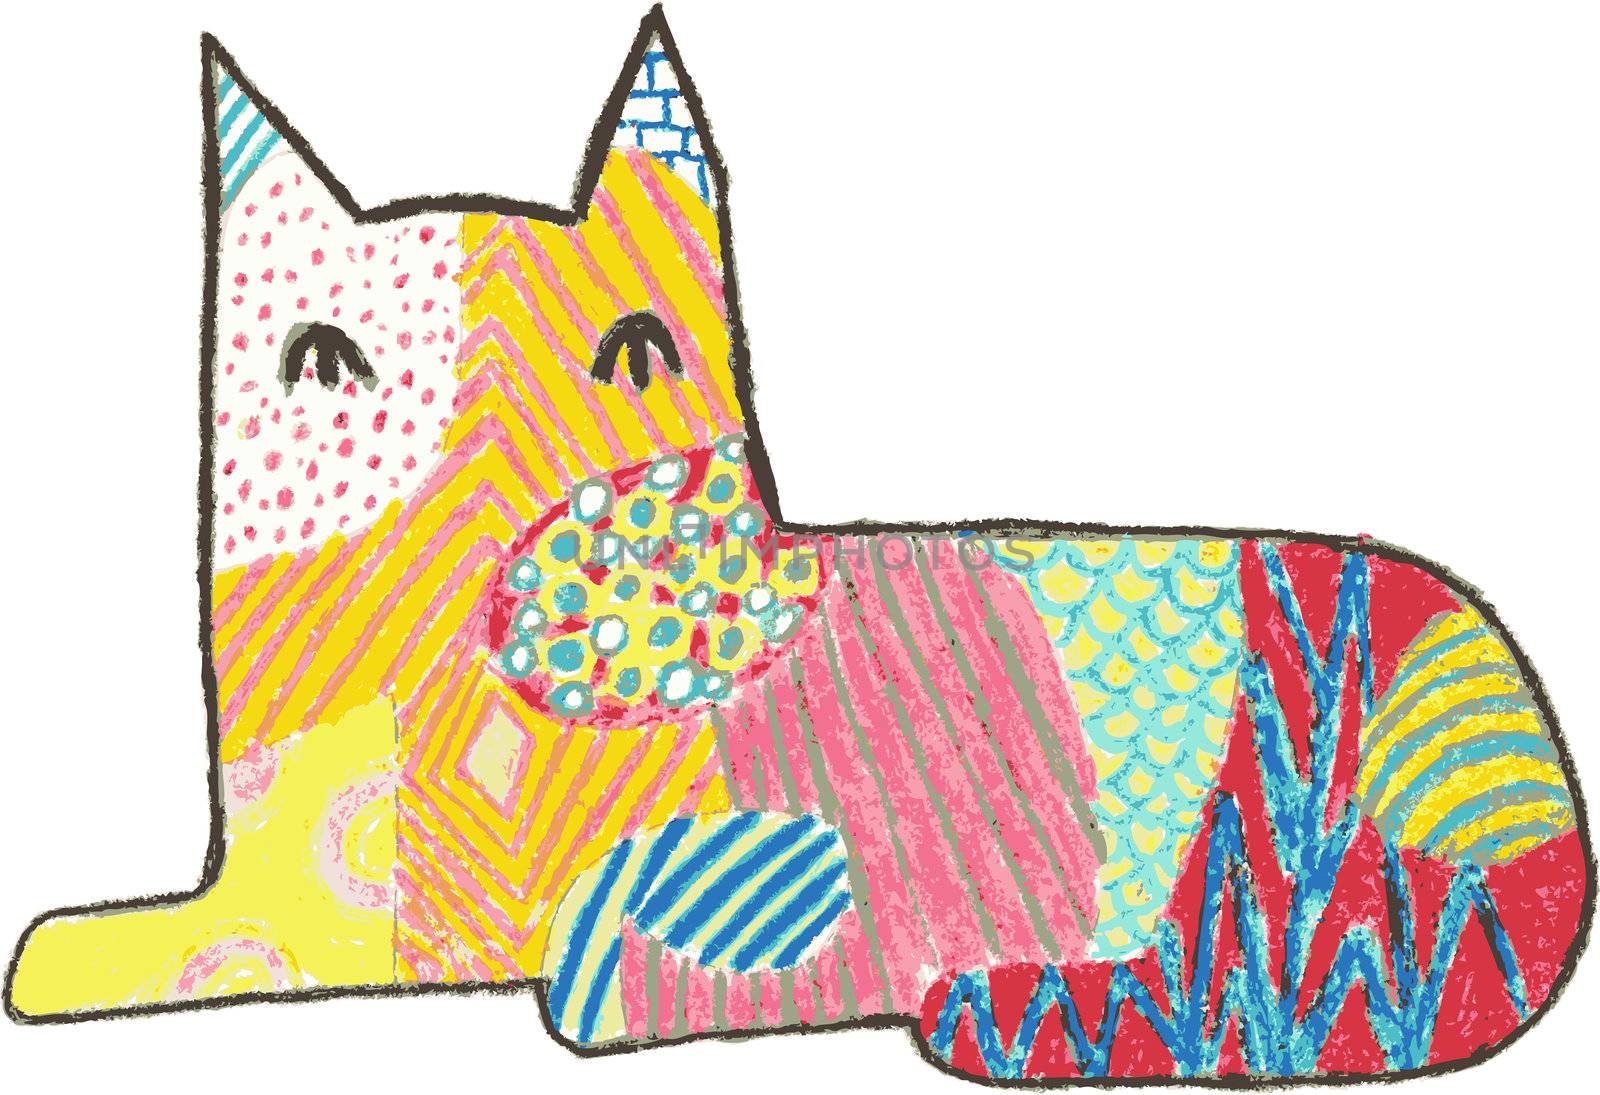 Vector style crayon design of a sitting cat